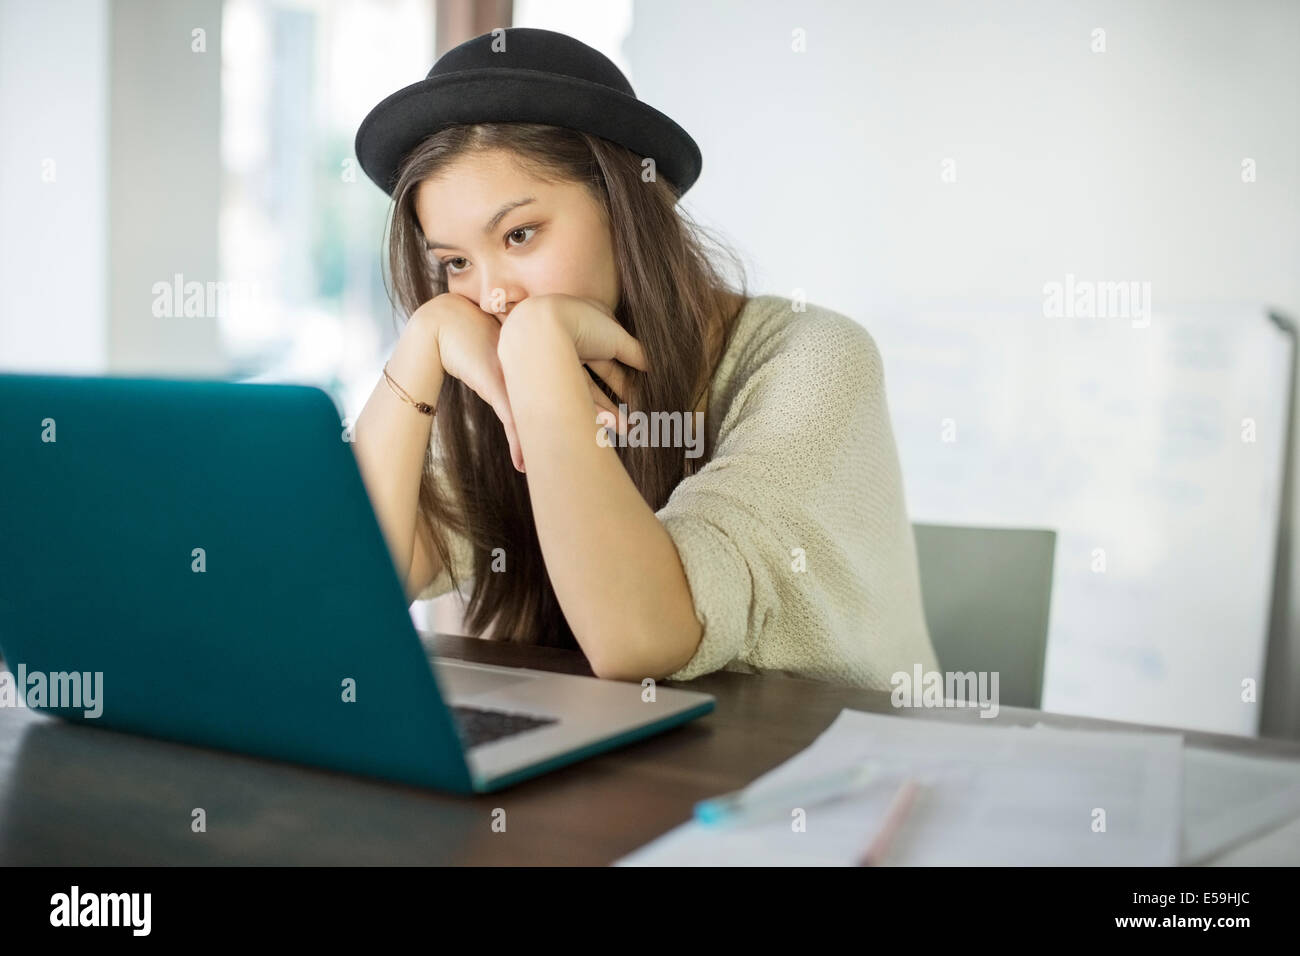 Woman working at laptop in office Stock Photo